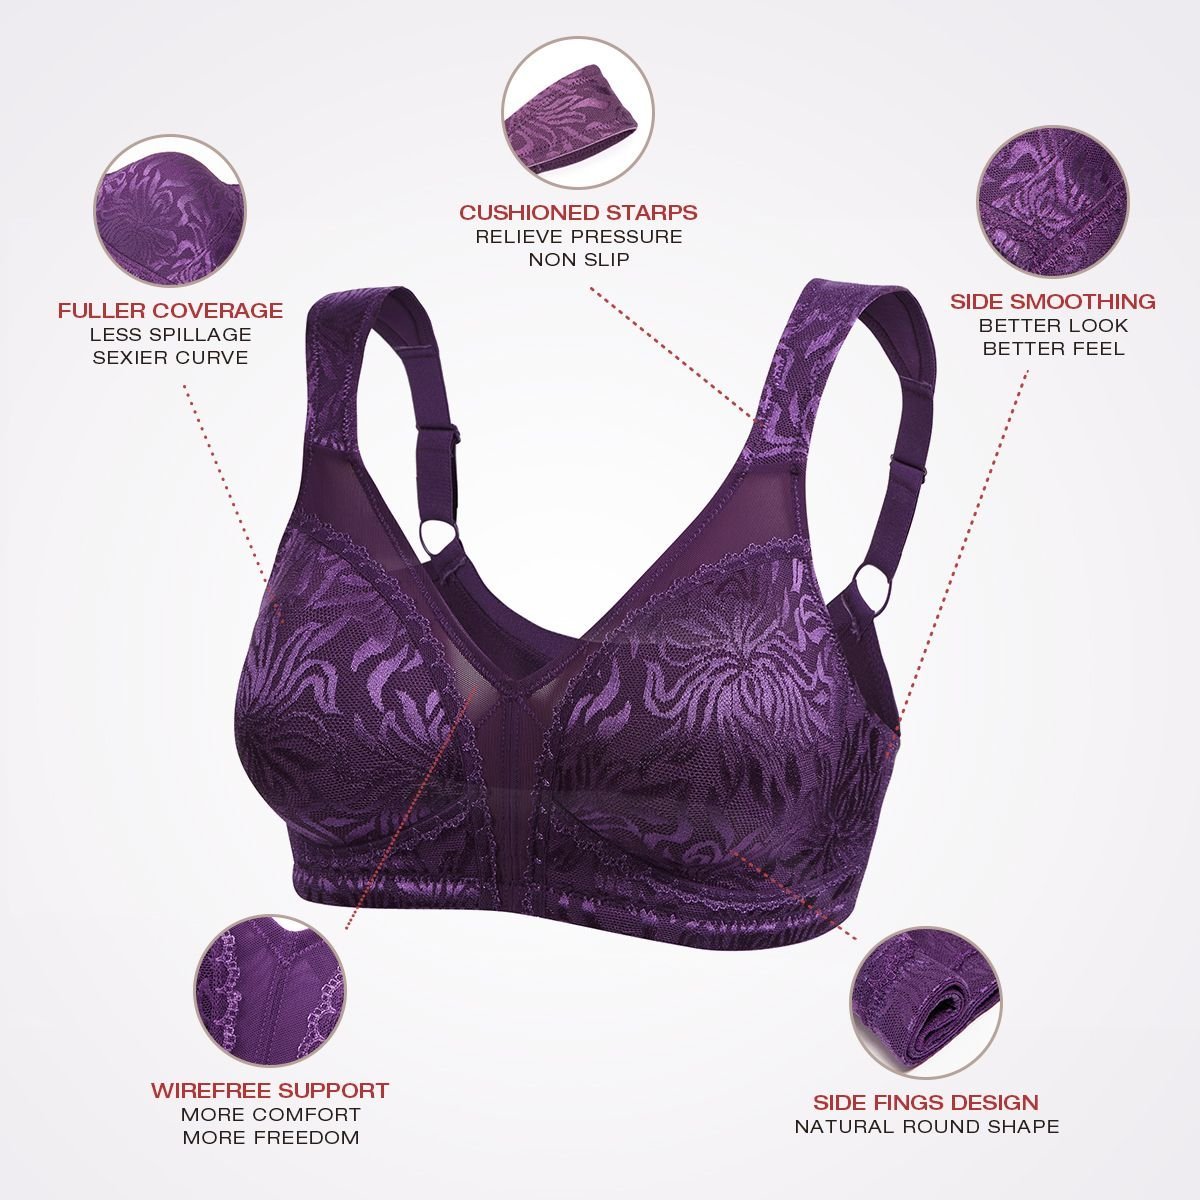 Minimizer Full Coverage Bra Non Padded Wire-free Toffee – WingsLove